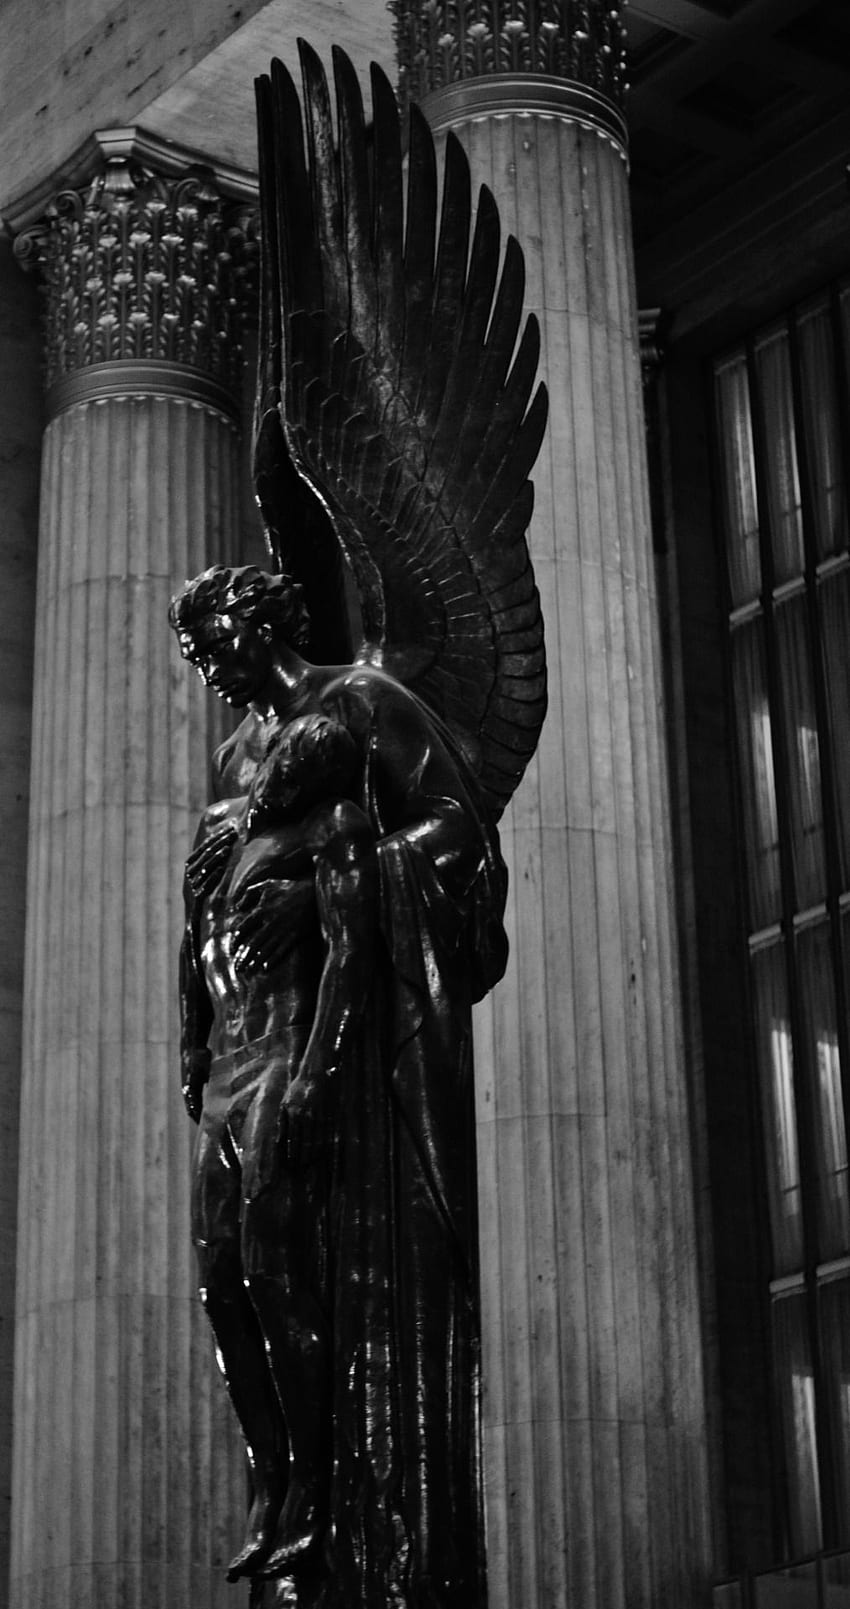 A statue of an angel in front of two columns. - Statue